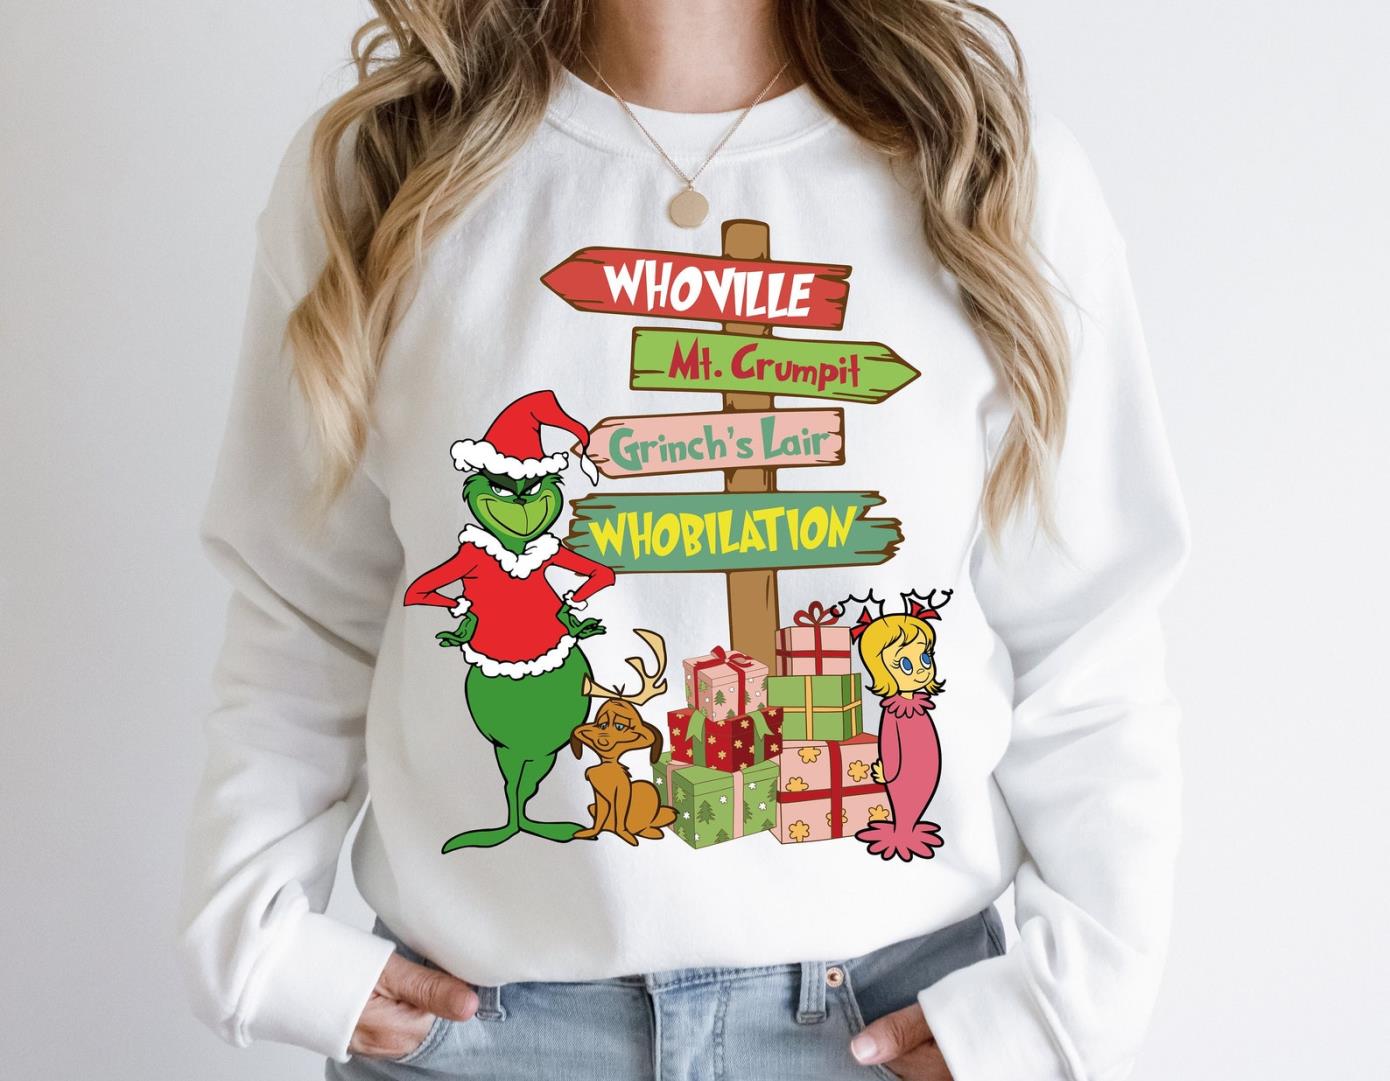 Grinch Sign Whoville Mt Crumpit Grinch Lair Whobilation Shirt Wearableartnow